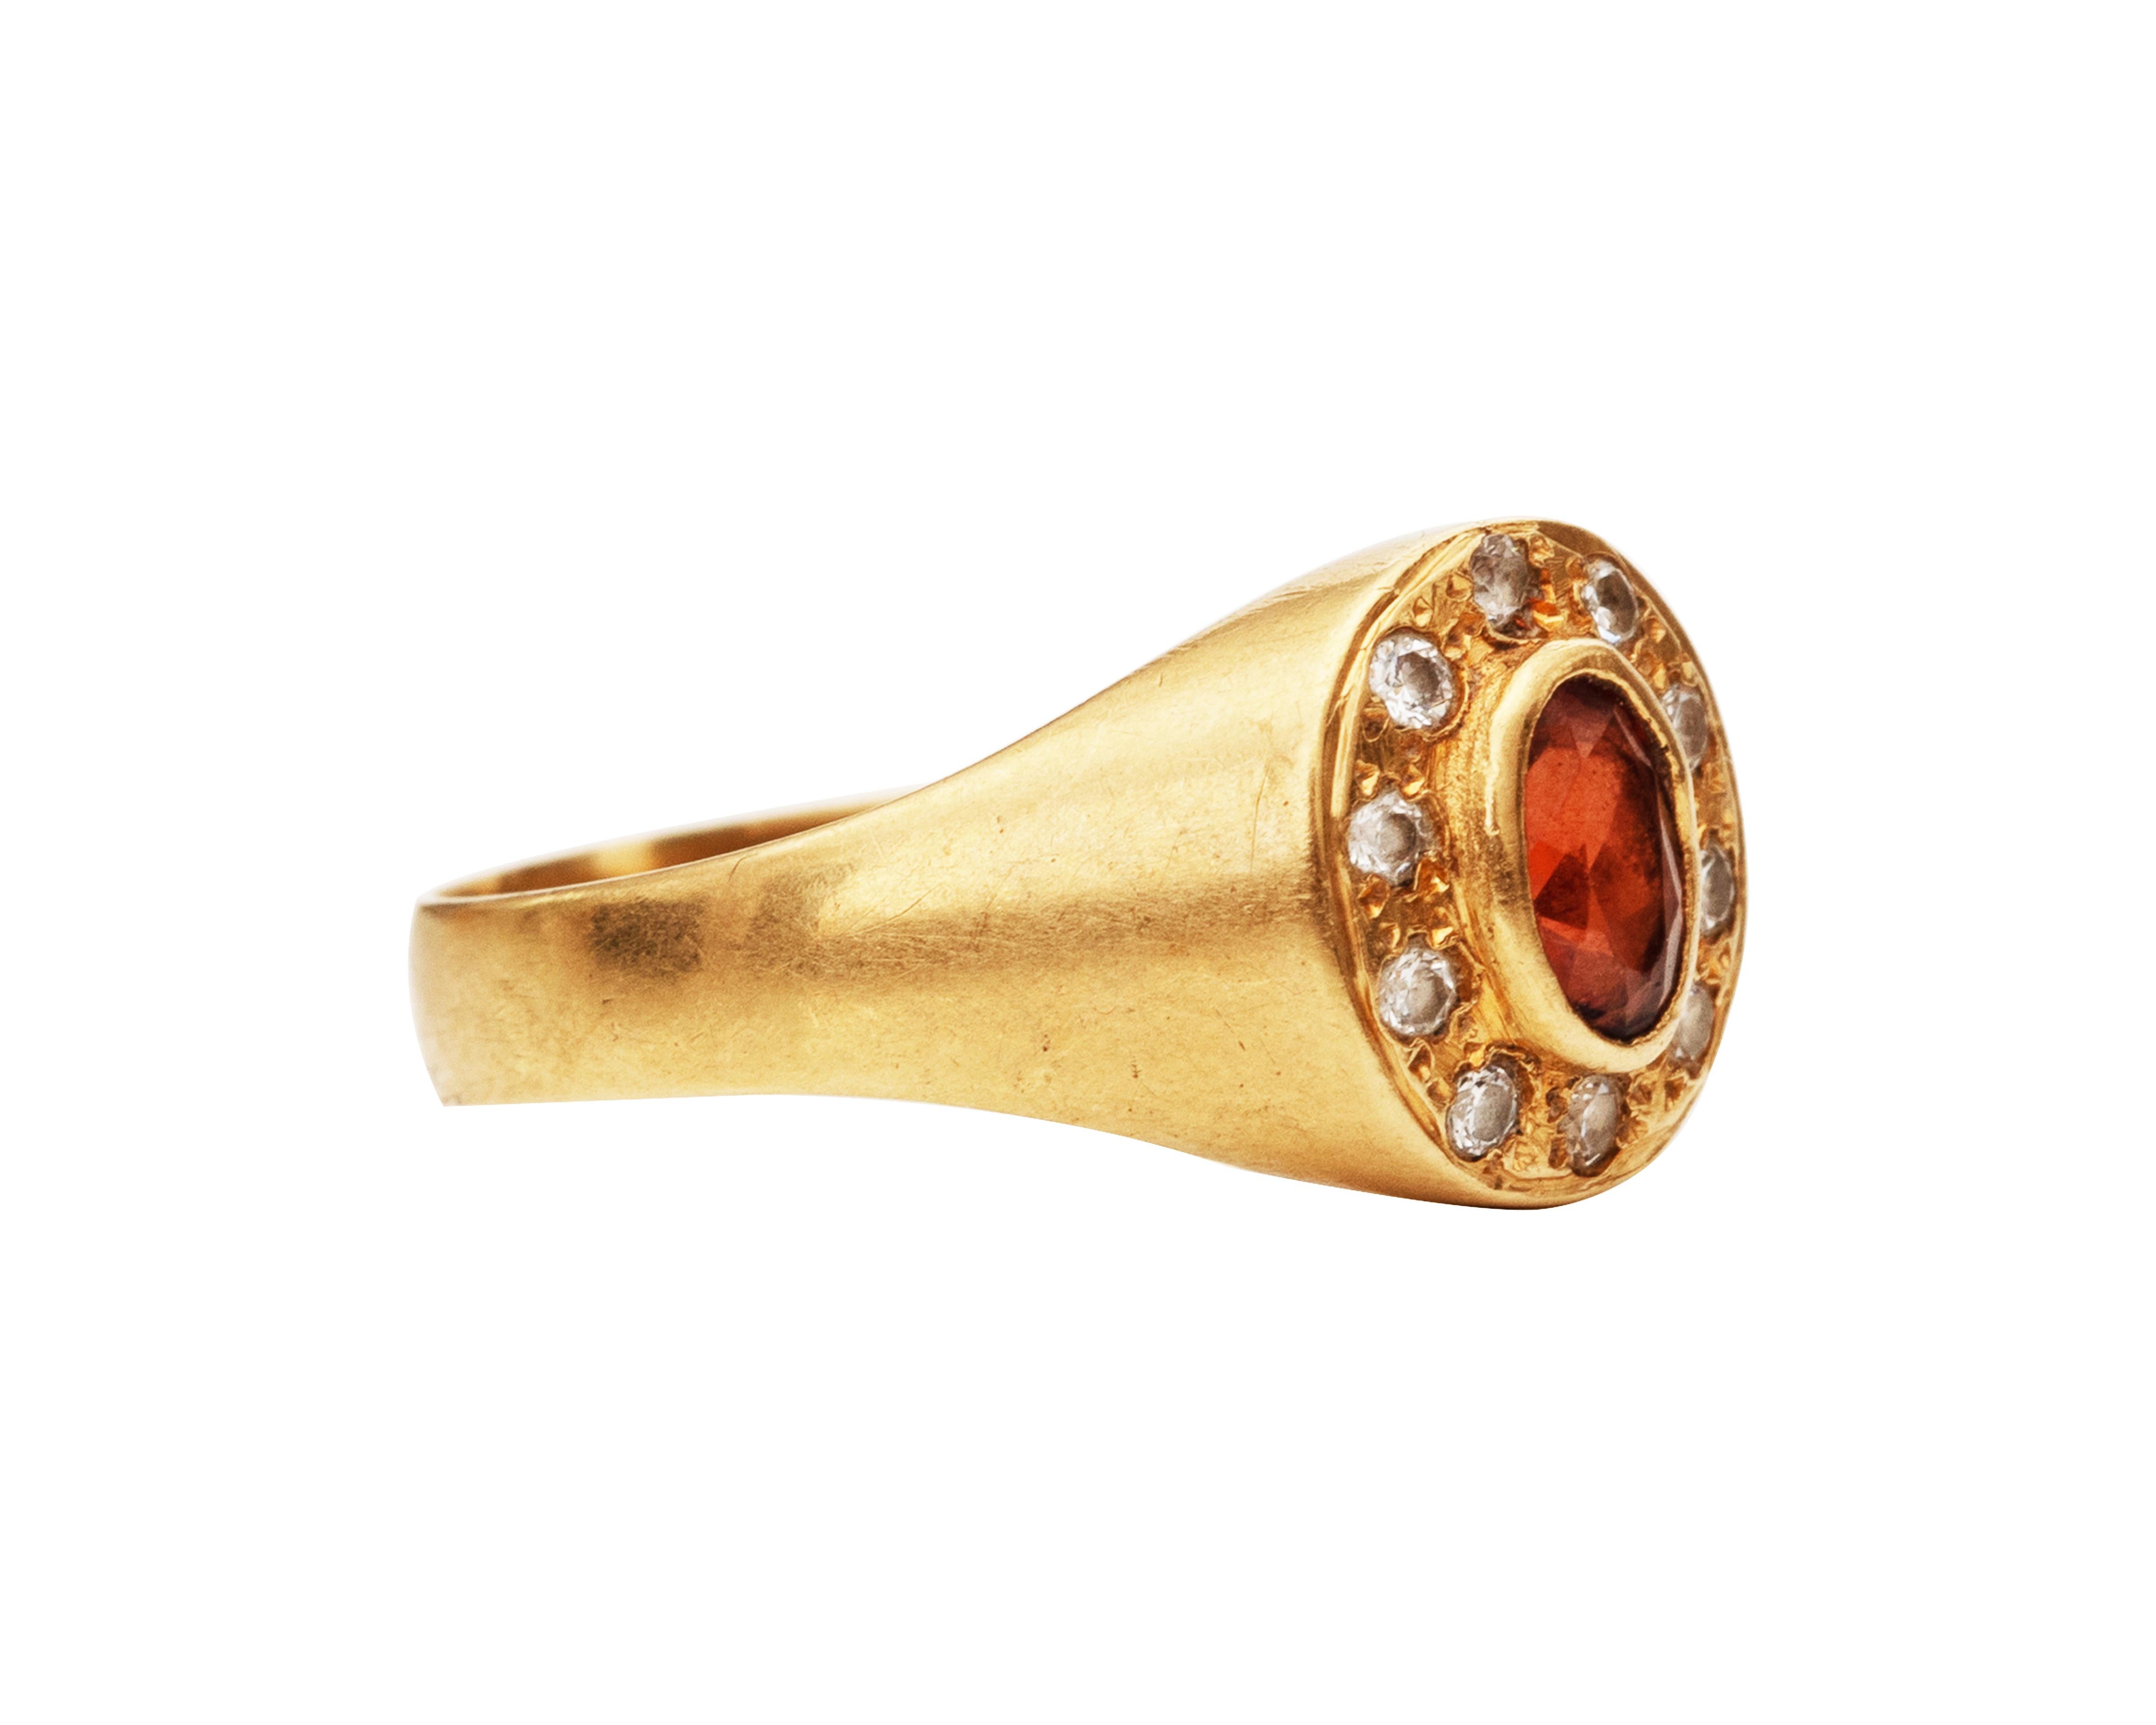 This ring is from the 1980s. It features a stunning imperial topaz in the center that is bezel set. The yellow gold has a striking contrast with the hues of topaz. 

Item Details:
Metal type: 18 Karat Gold
Size: 7
Weight: 3.13 grams

Diamond